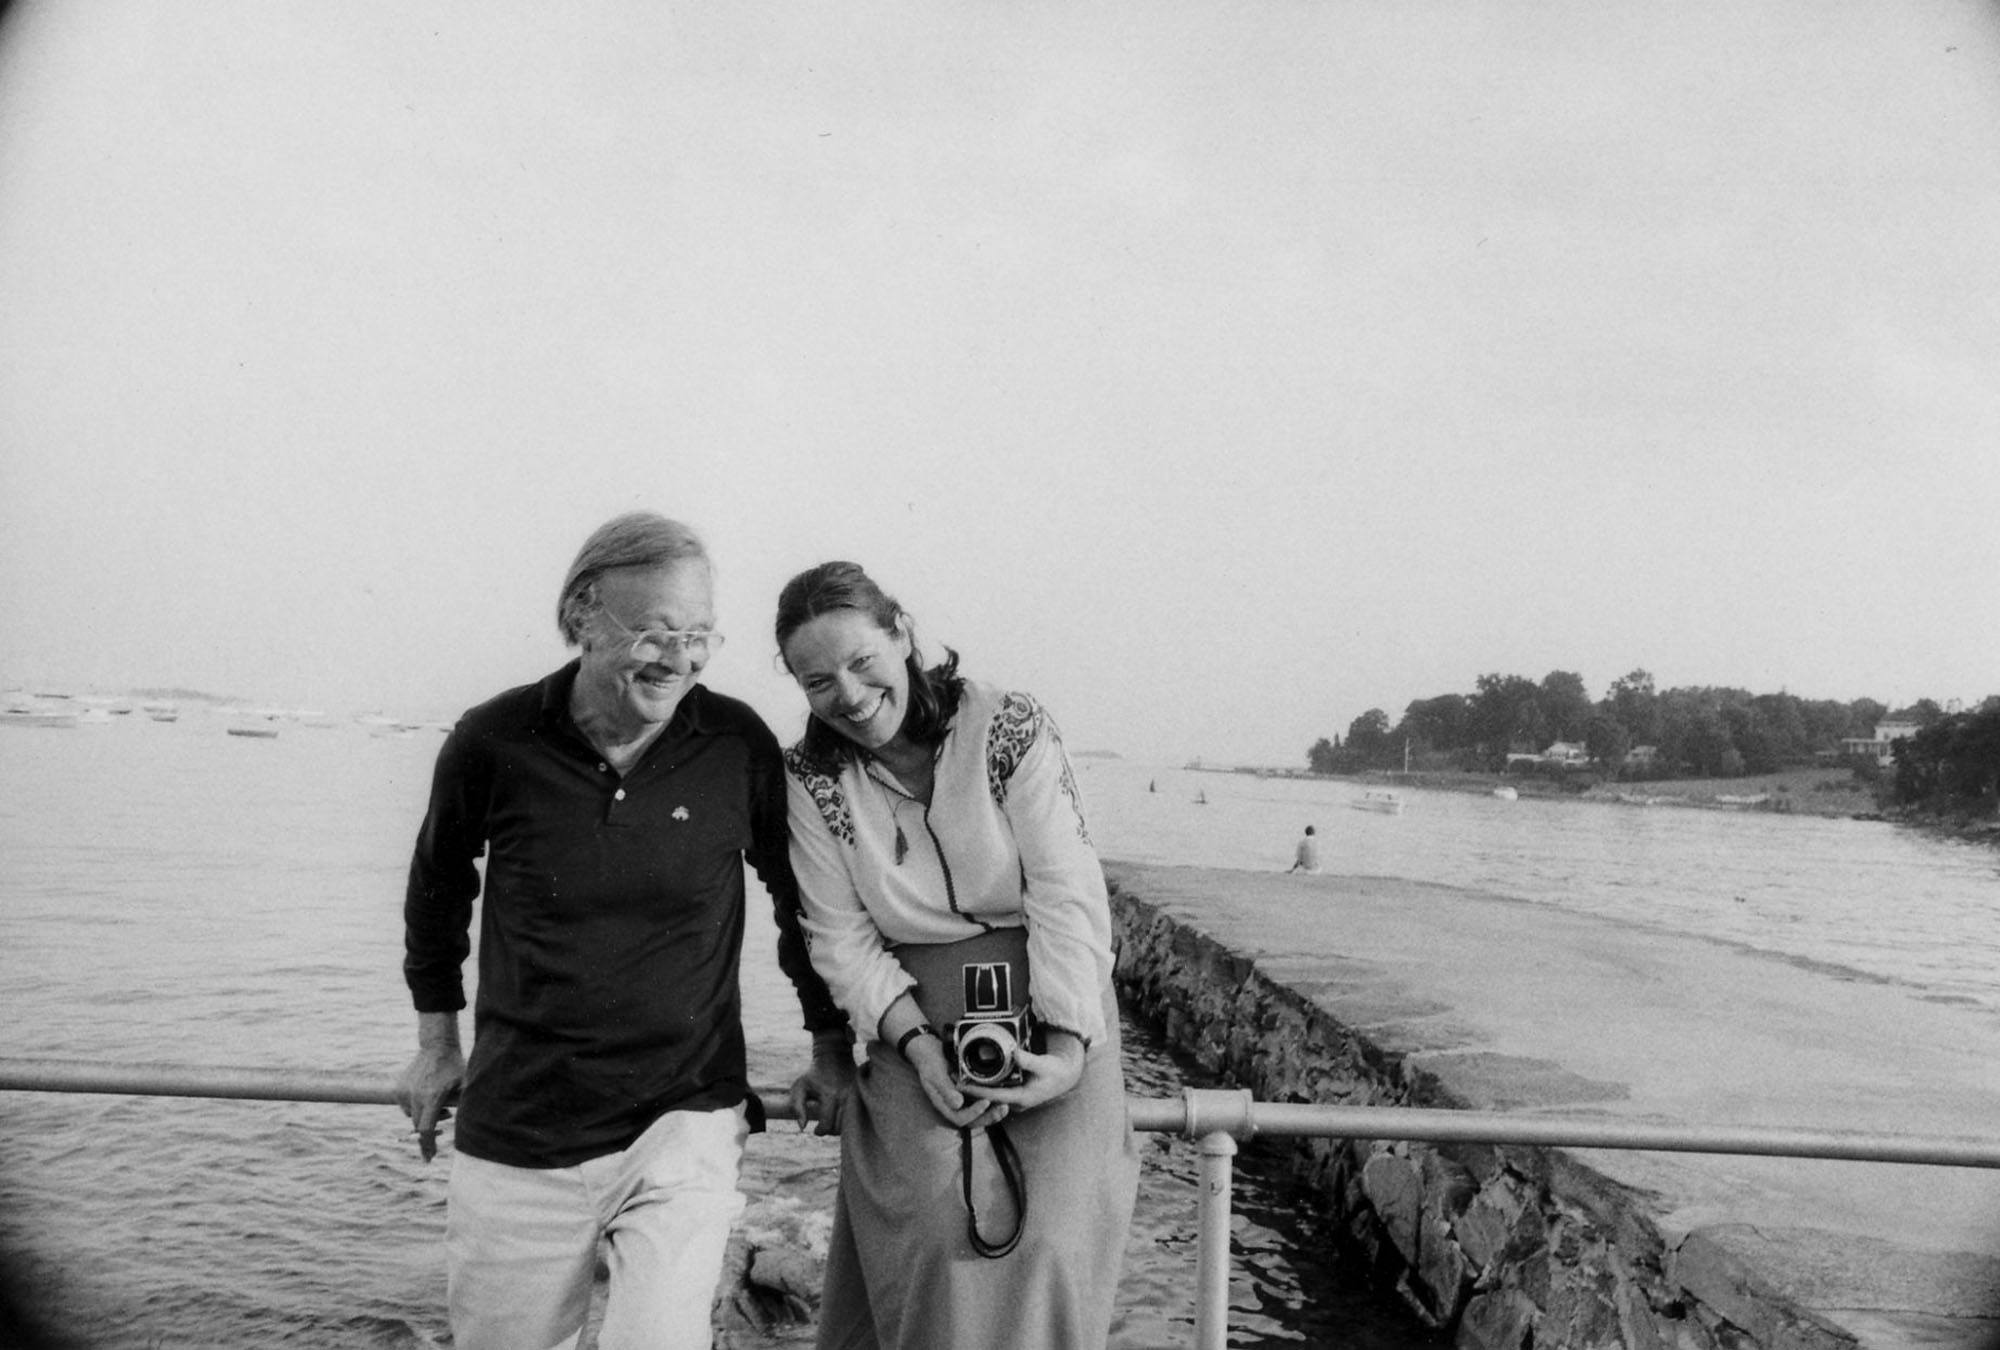 Robert Motherwell and Renate Ponsold laughing at the seaside during the 1980s. Ponsold holds a camera.